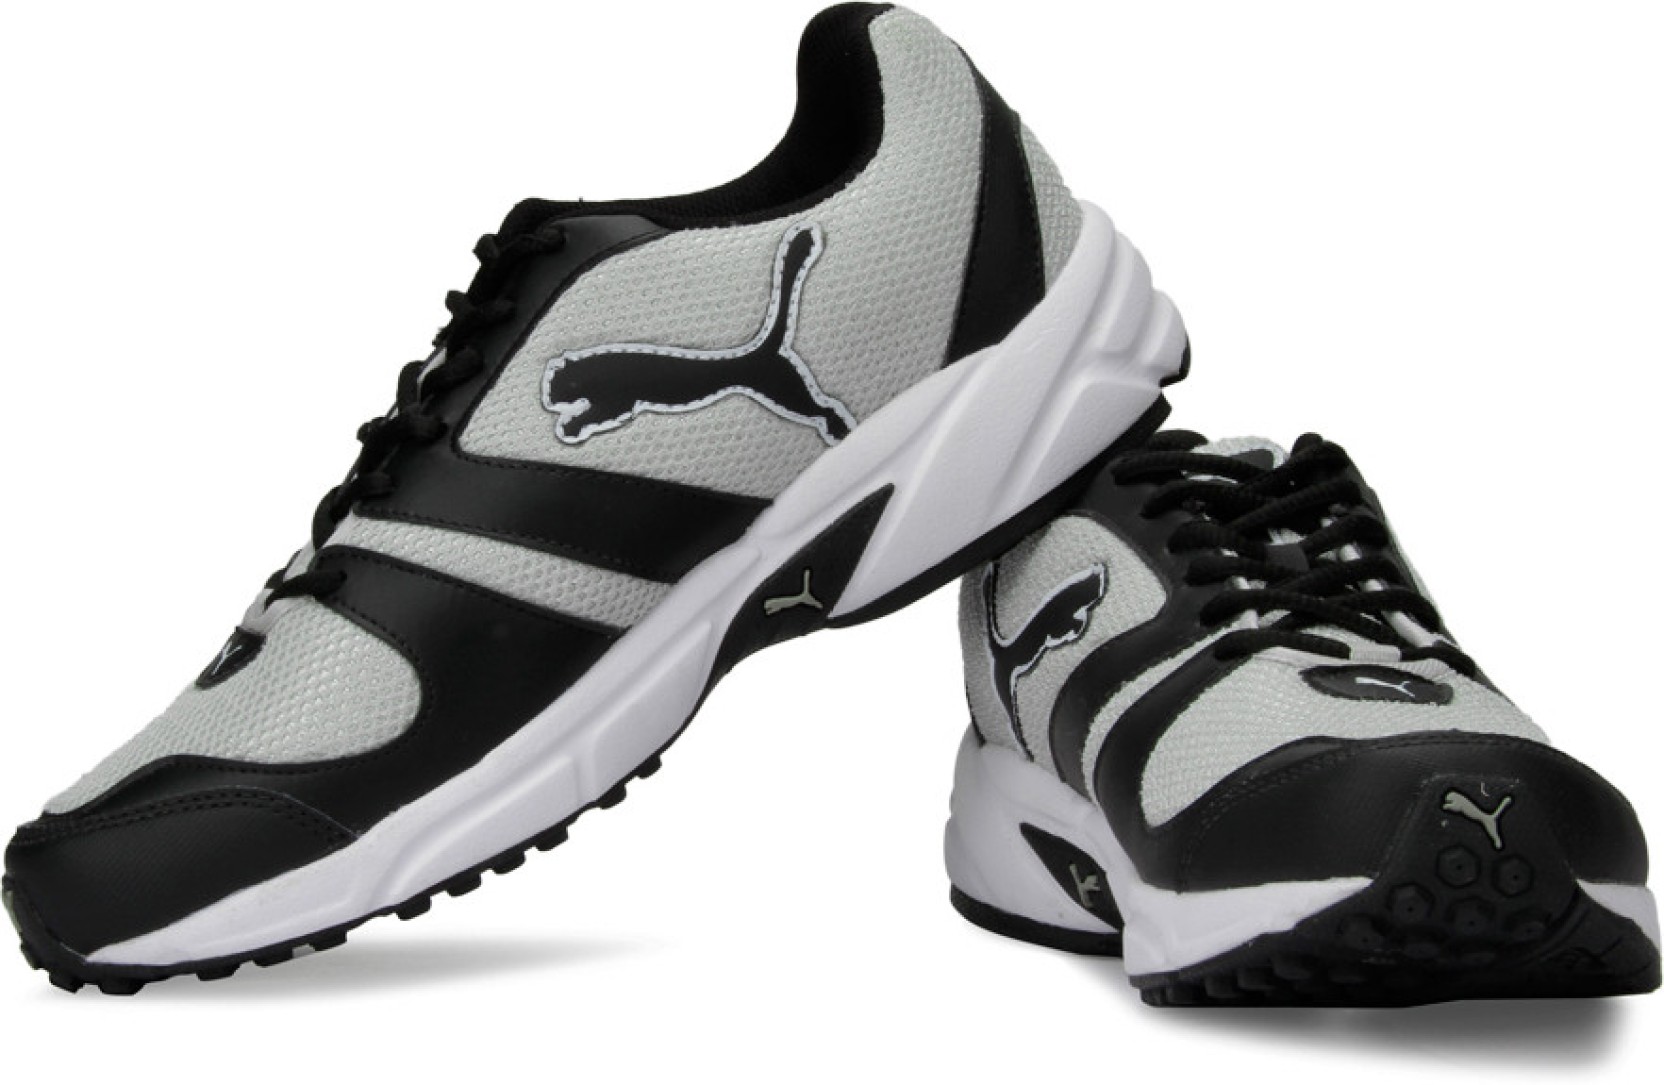 Puma Running Shoes - Buy Black, Silver Color Puma Running Shoes Online ...